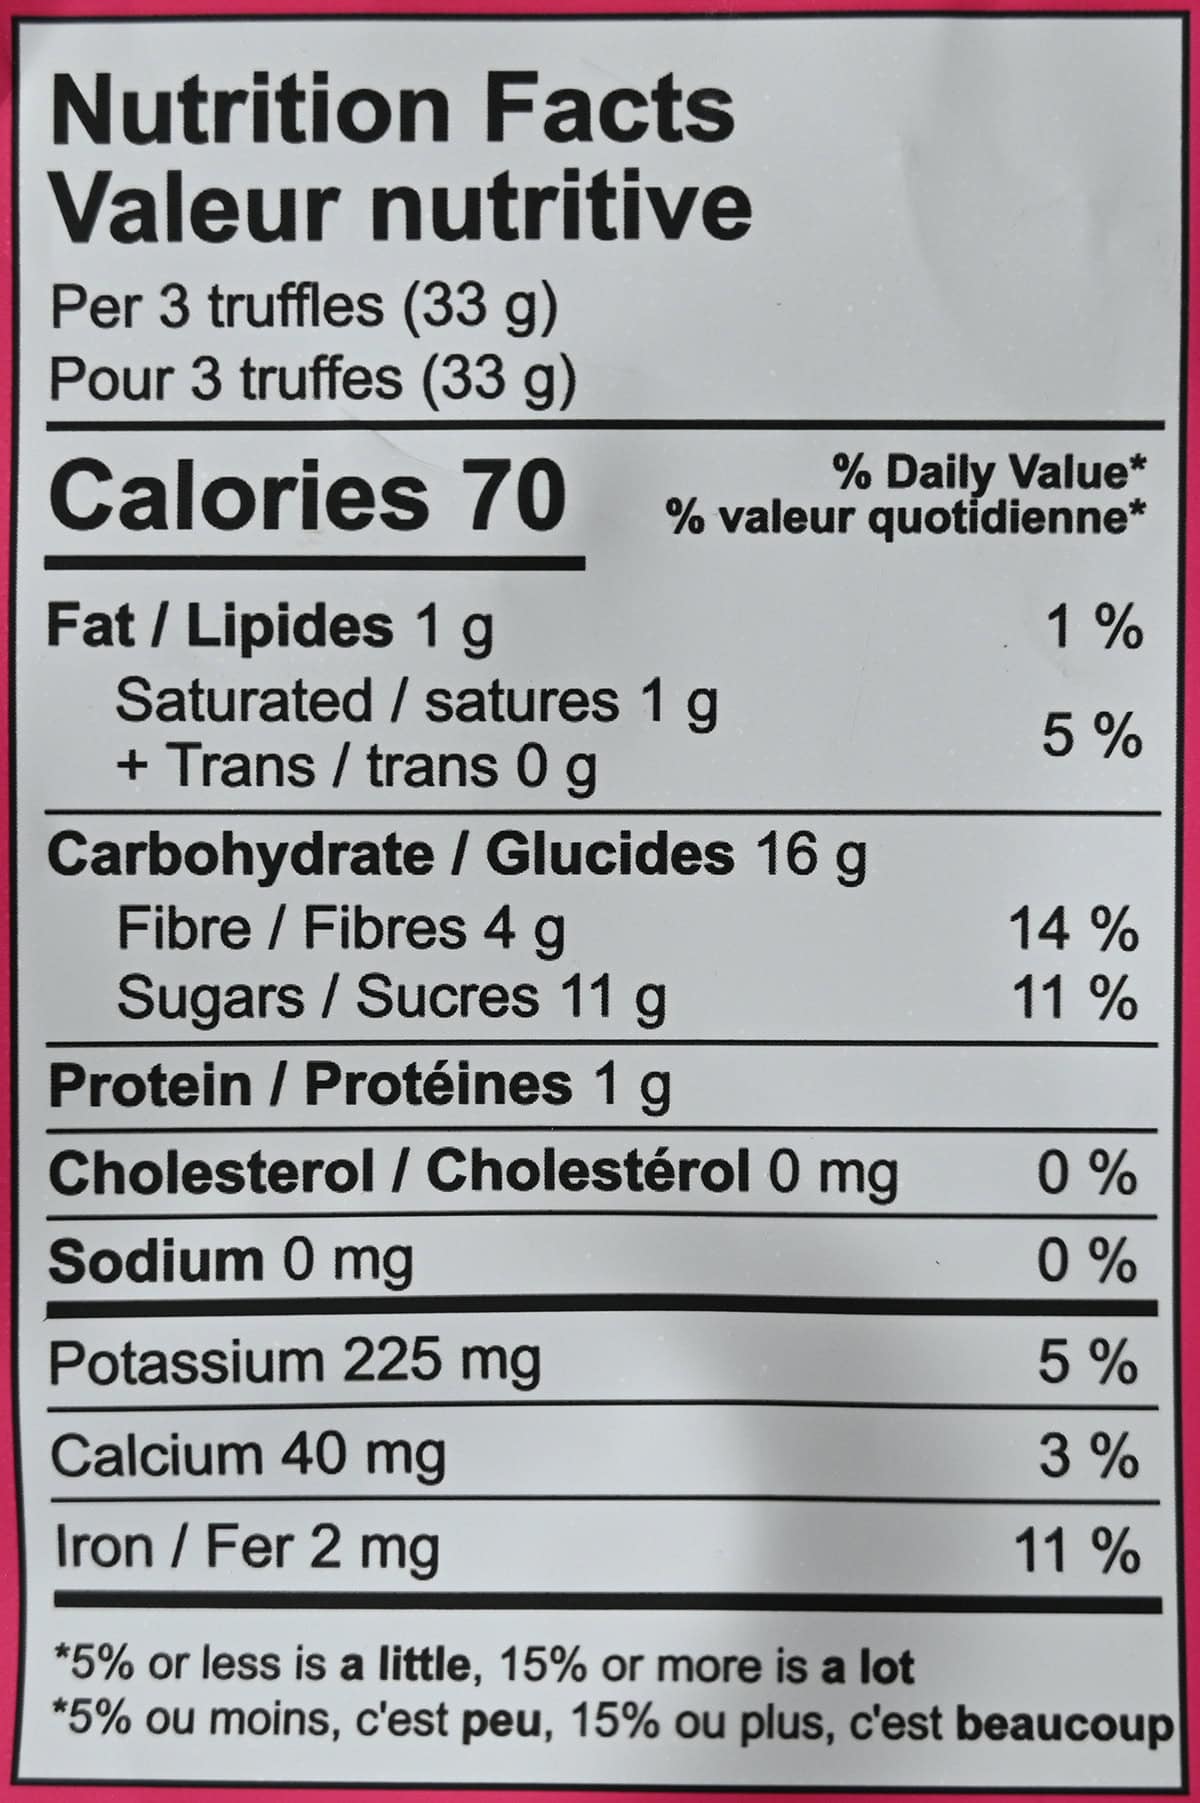 Image of the nutrition facts for the truffles from the back of the bag.